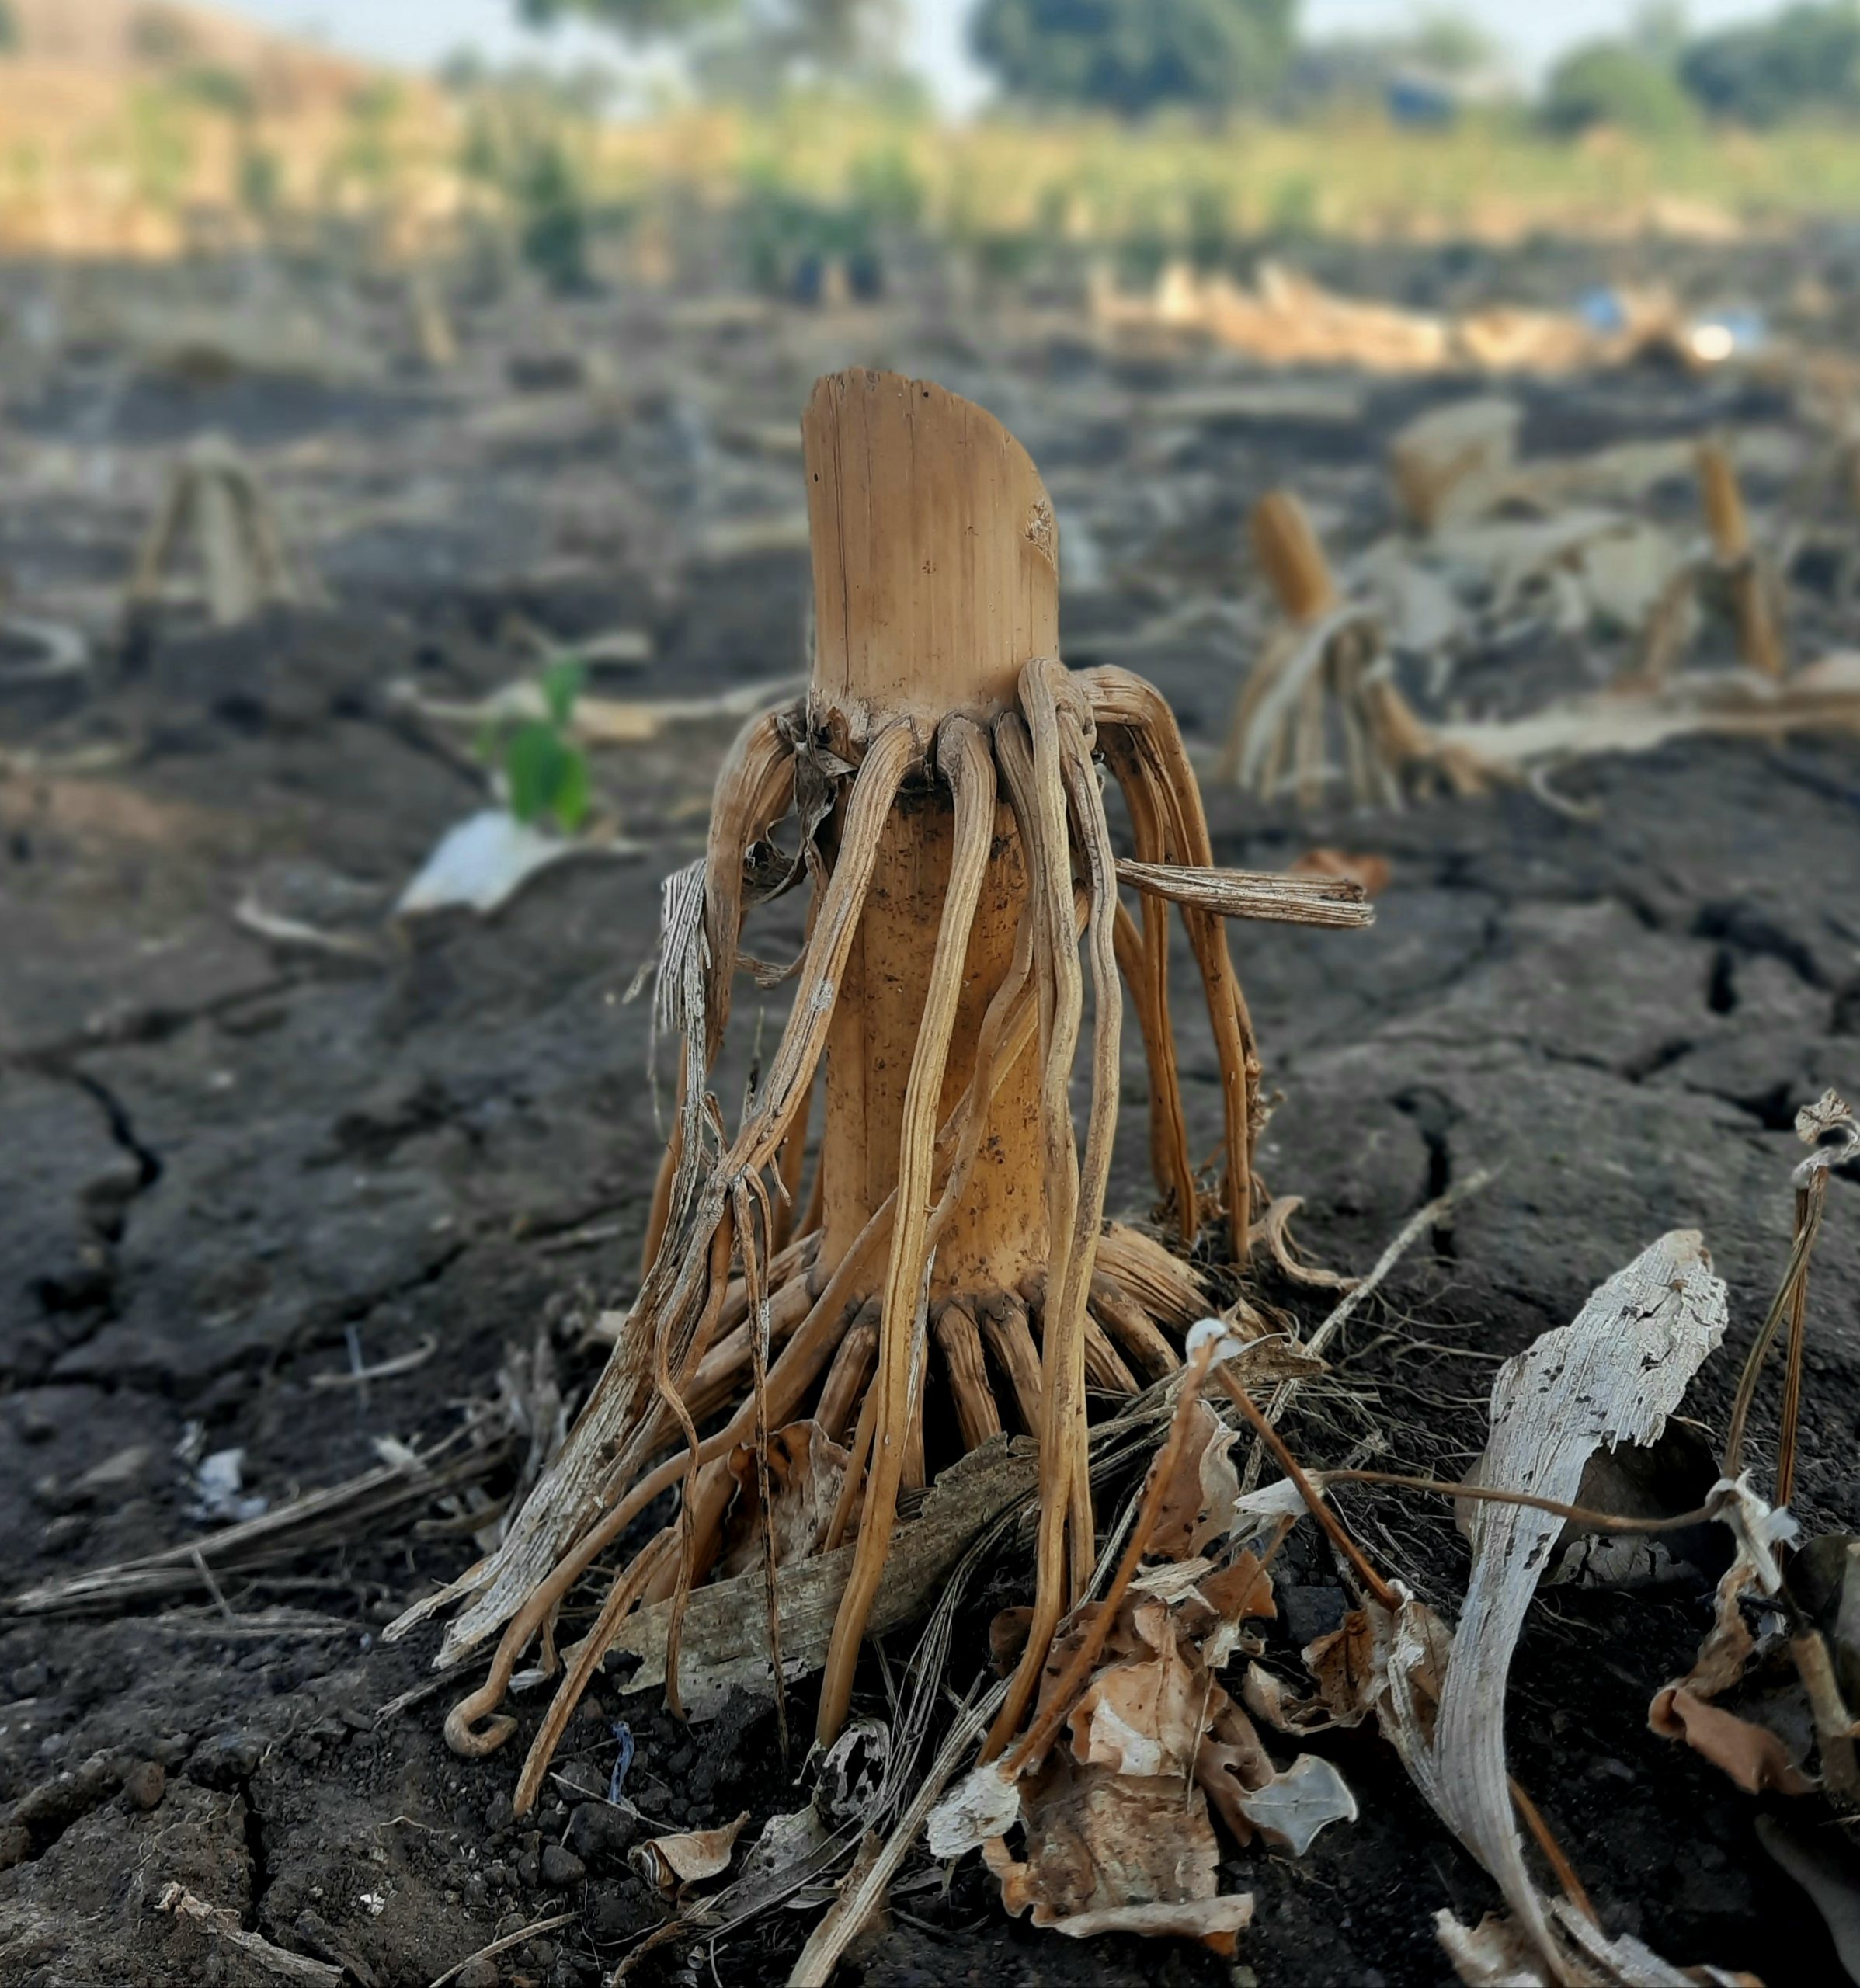 A root stump of maize plant